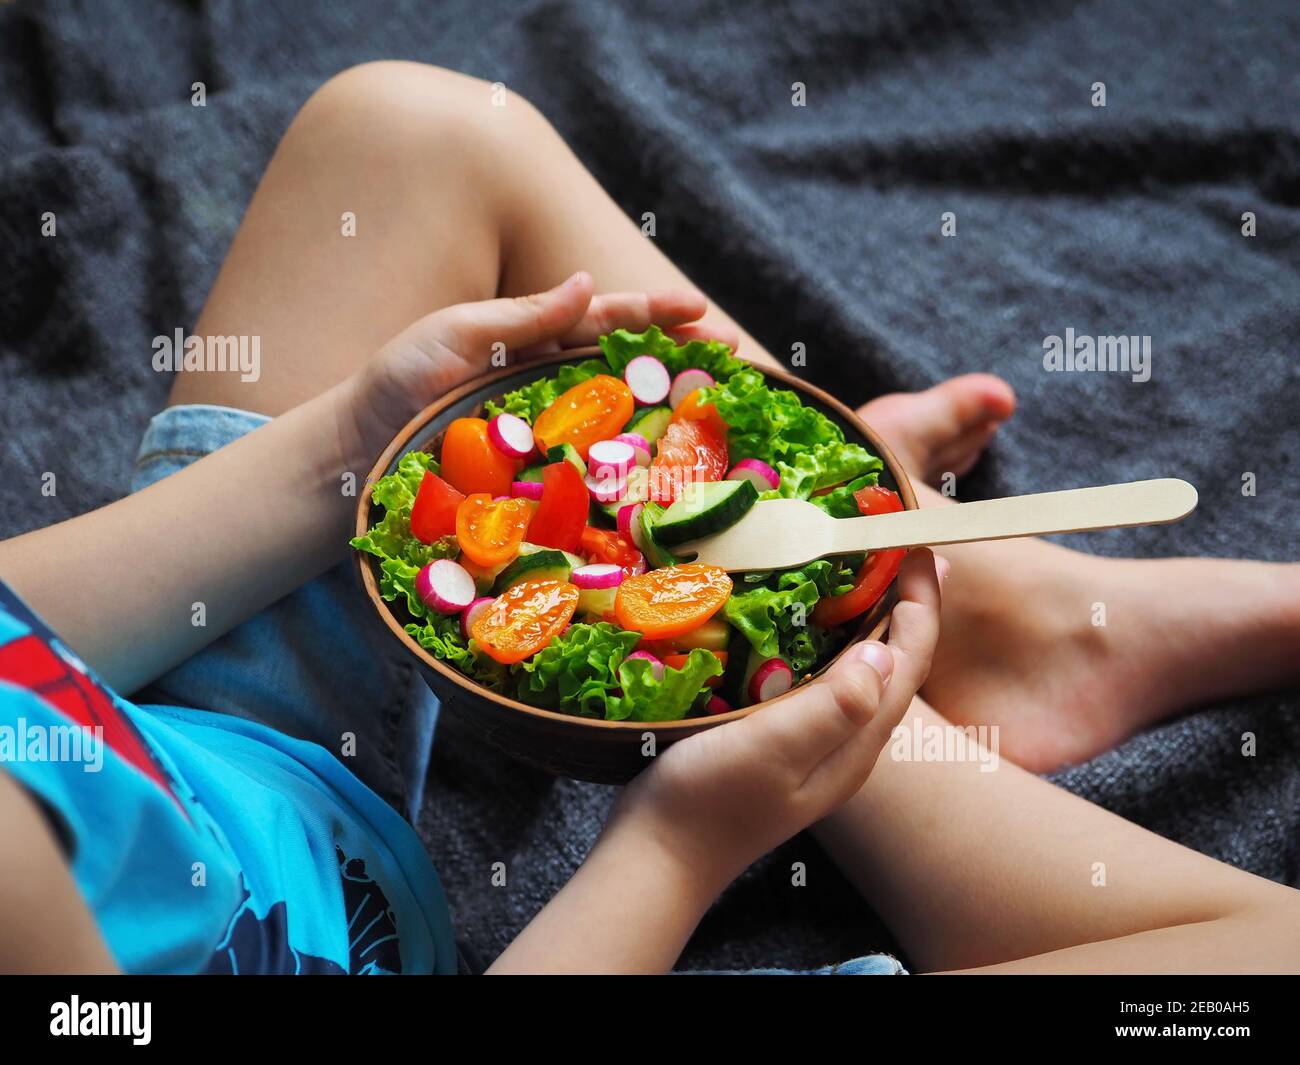 A boy in shorts sits cross-legged on the floor and eats a delicious green salad with orange tomatoes, radish and cucumber. Stock Photo